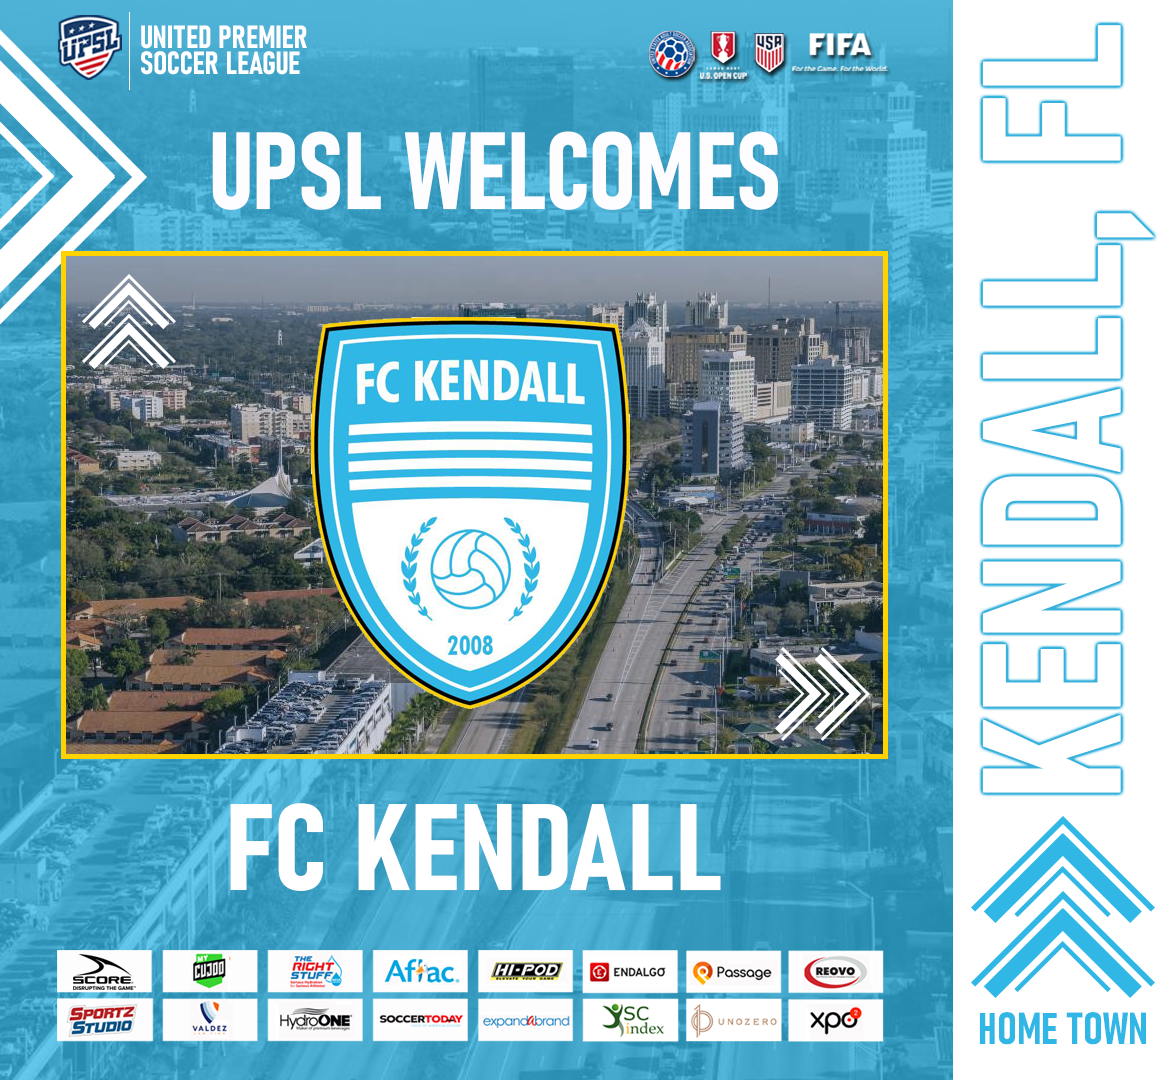 UPSL Announces South Florida Expansion with FC Kendall